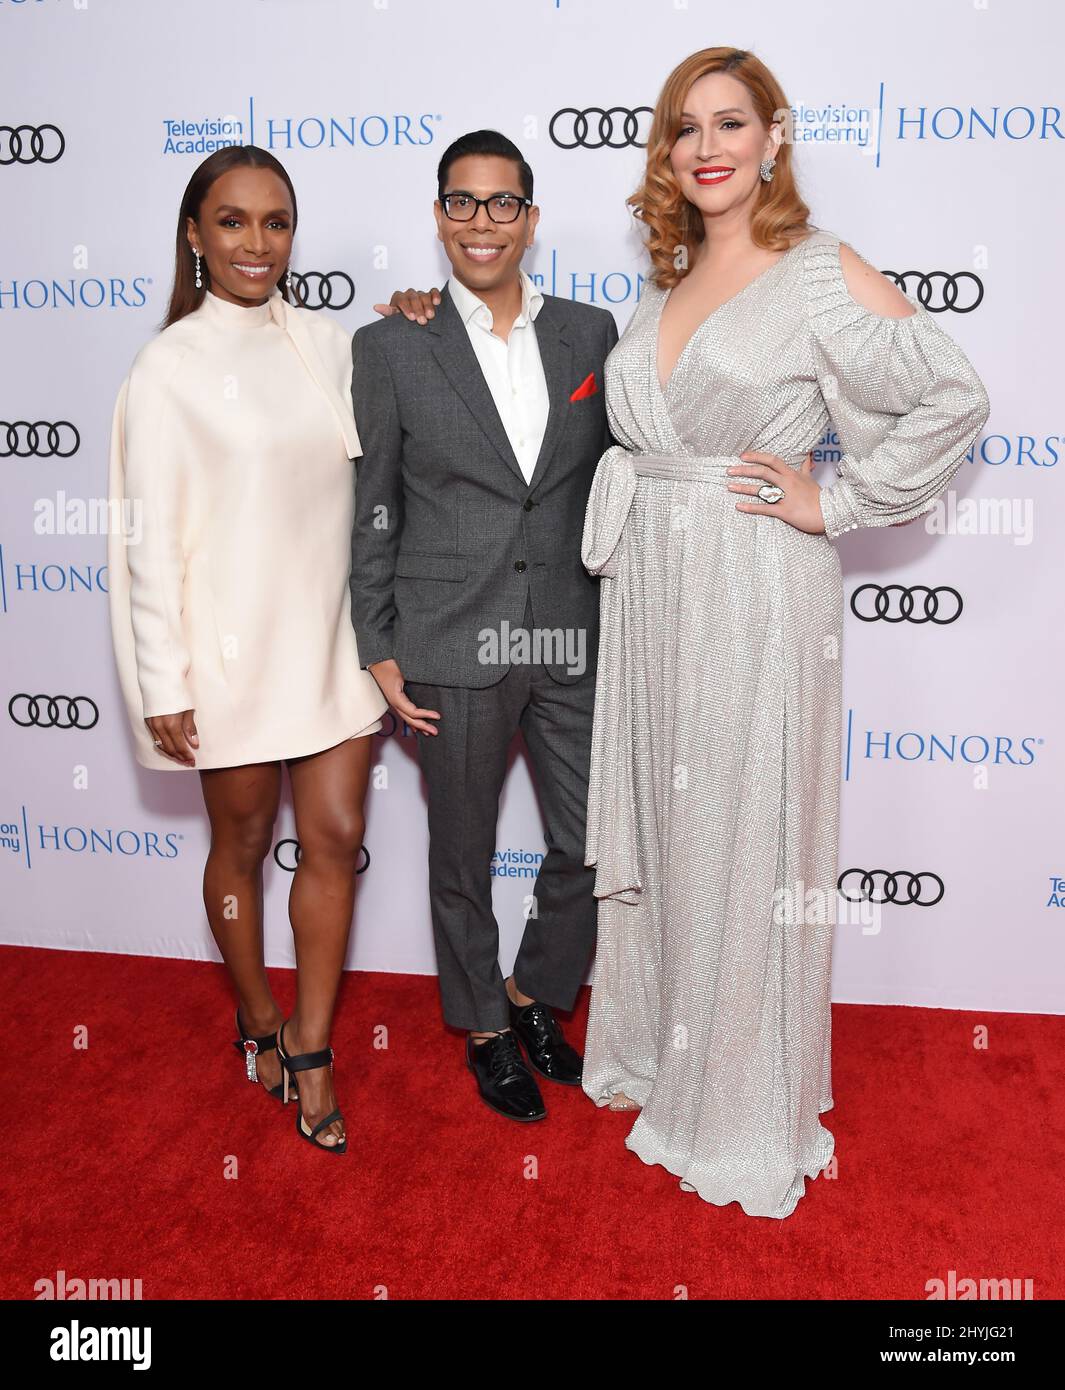 Janet Mock, Steve Canals and Our Lady J attending the Television ...